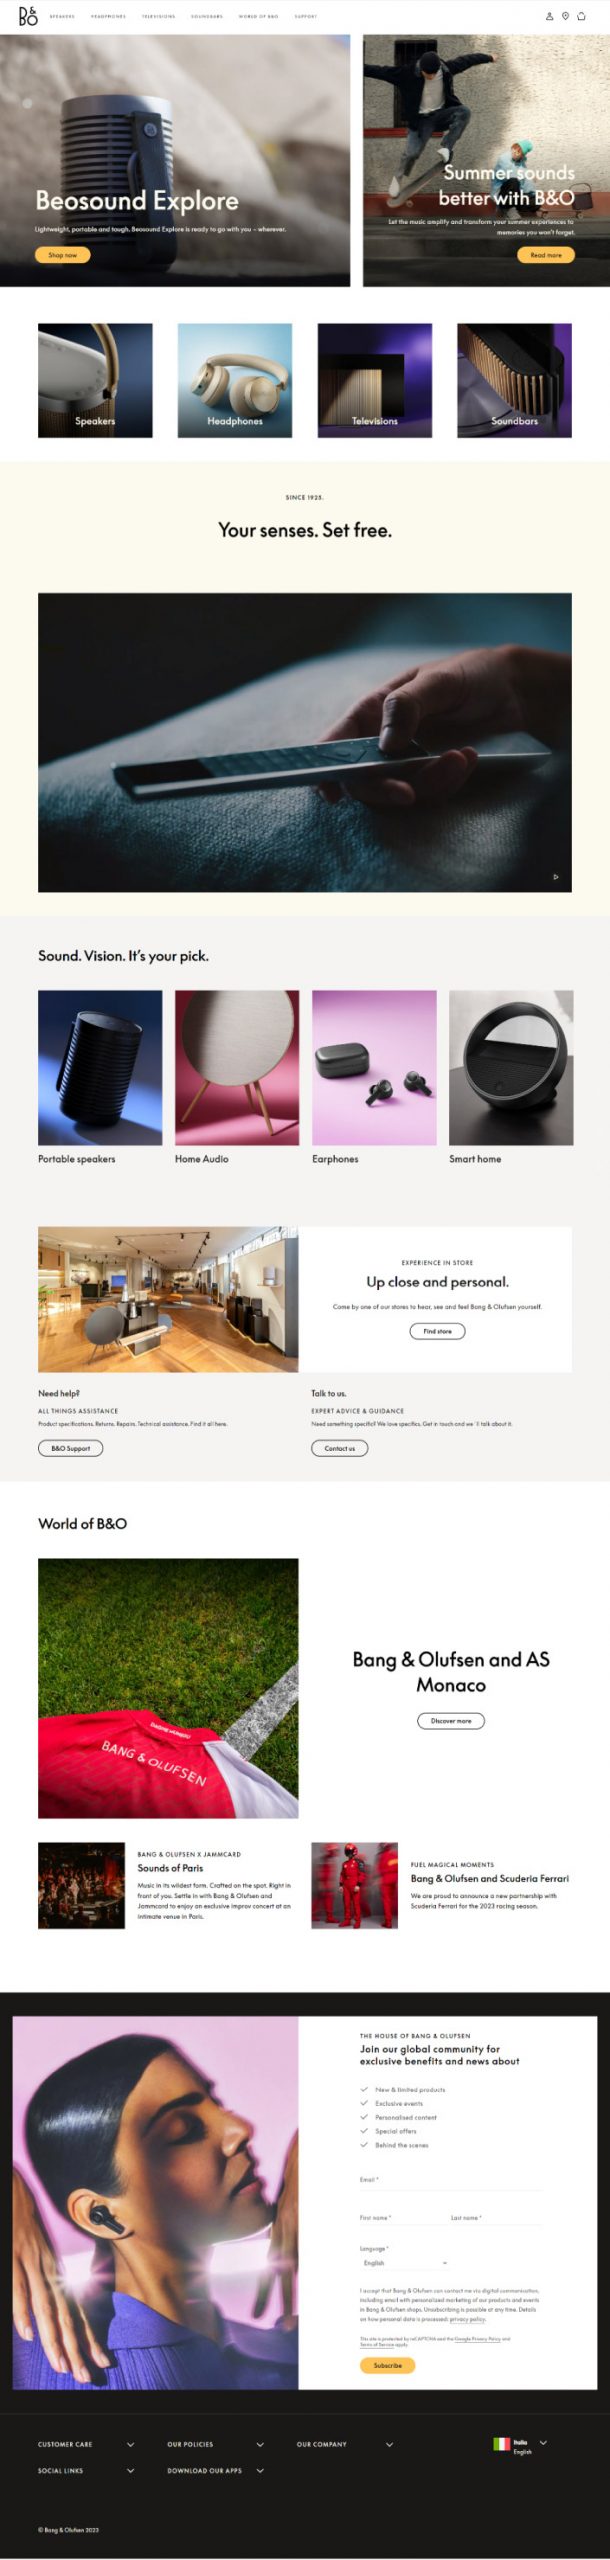 An image of Bang & Olufsen products